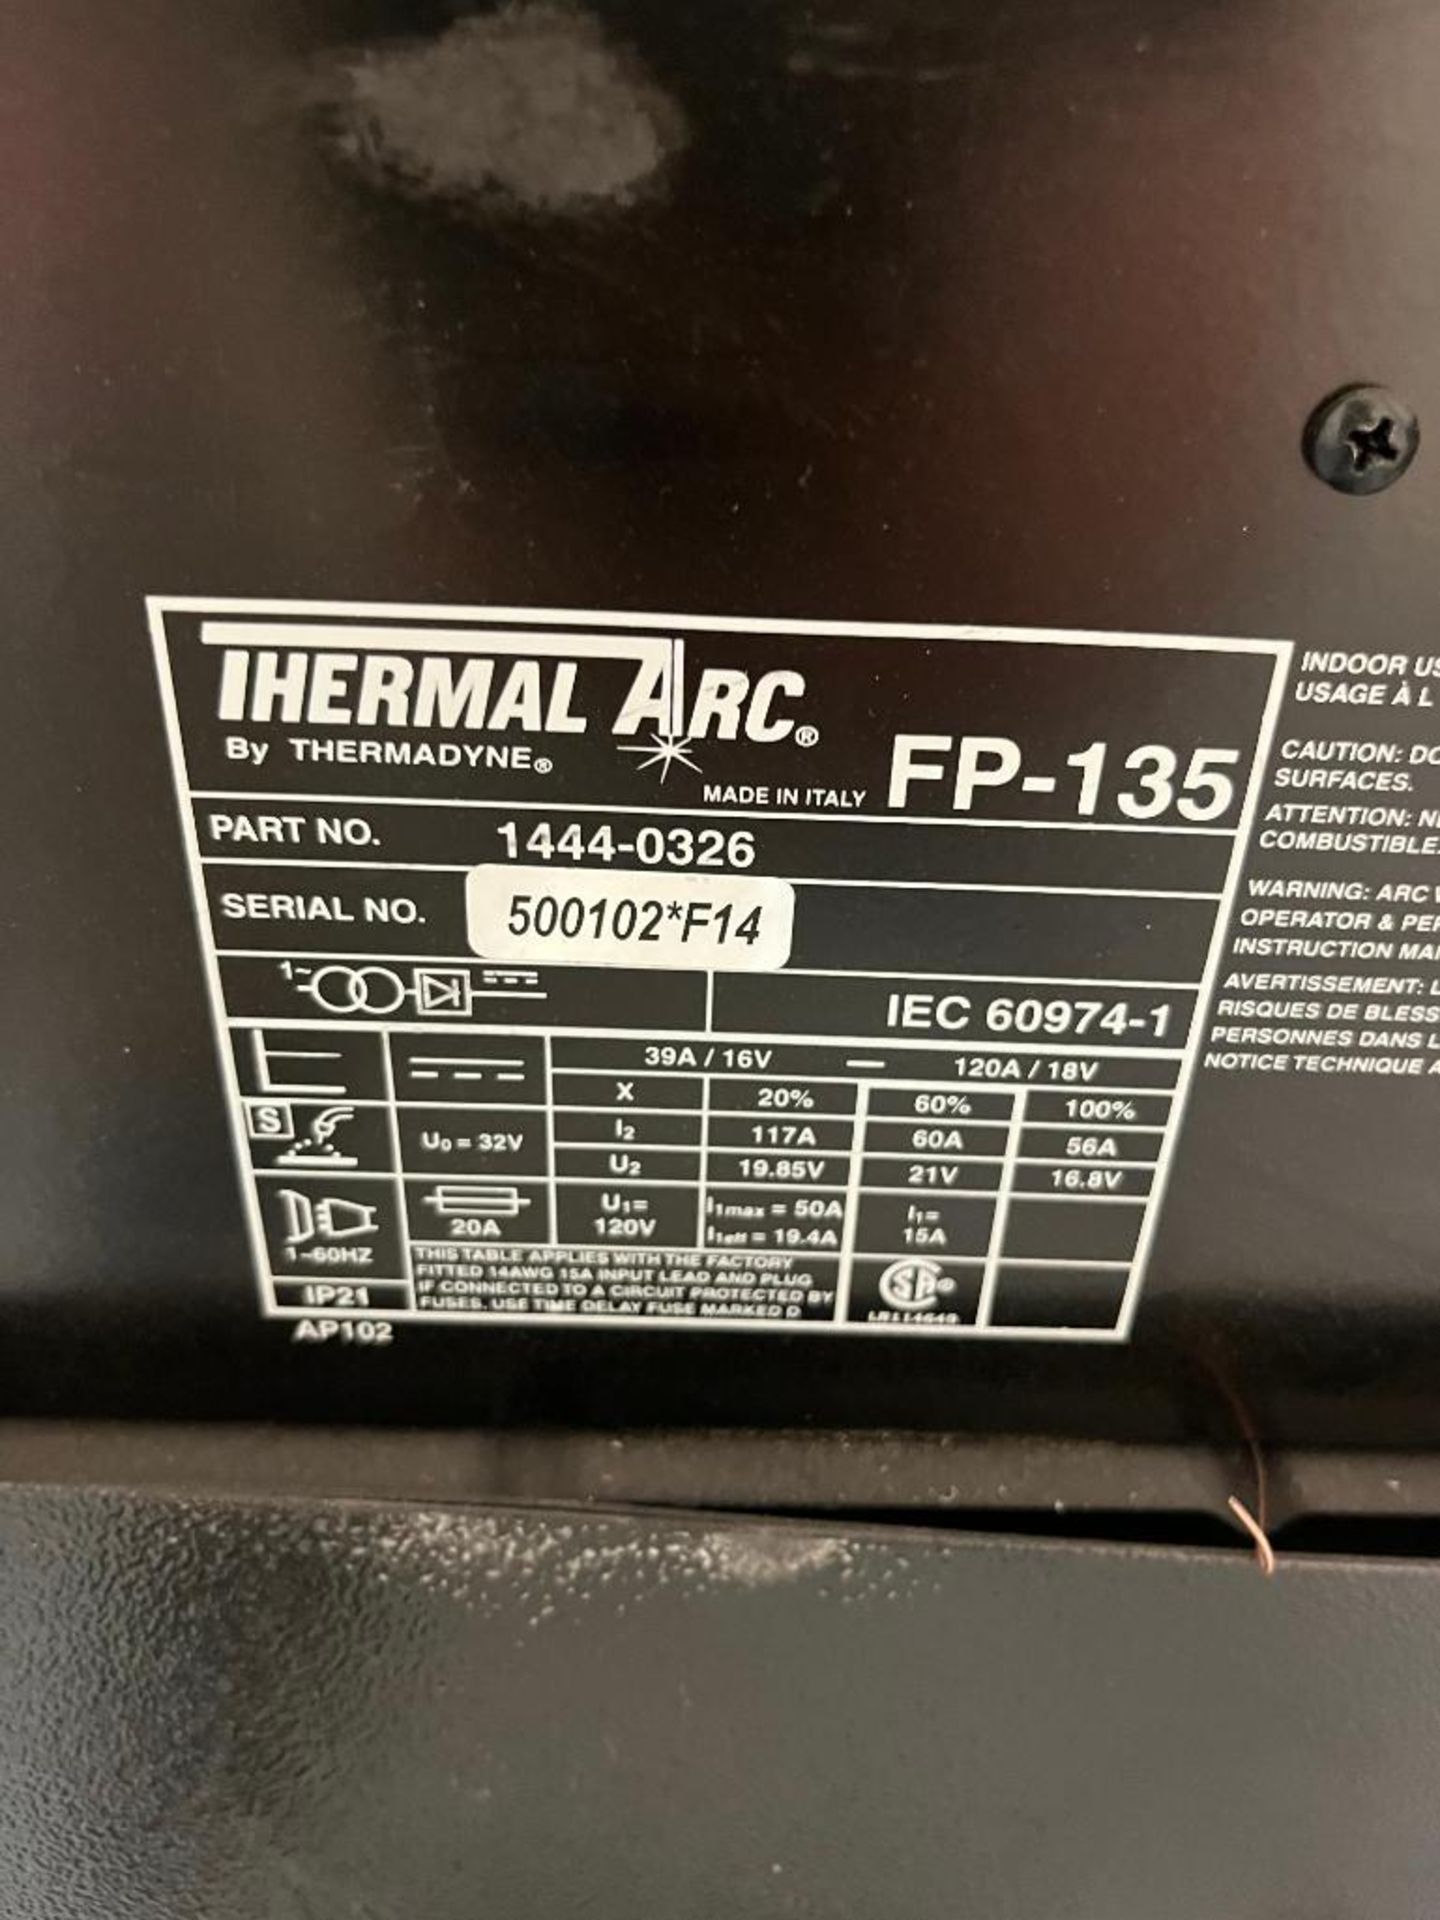 Thermal Arc Firepower Mig Welder, S/N 500102*F14 - Image 3 of 3